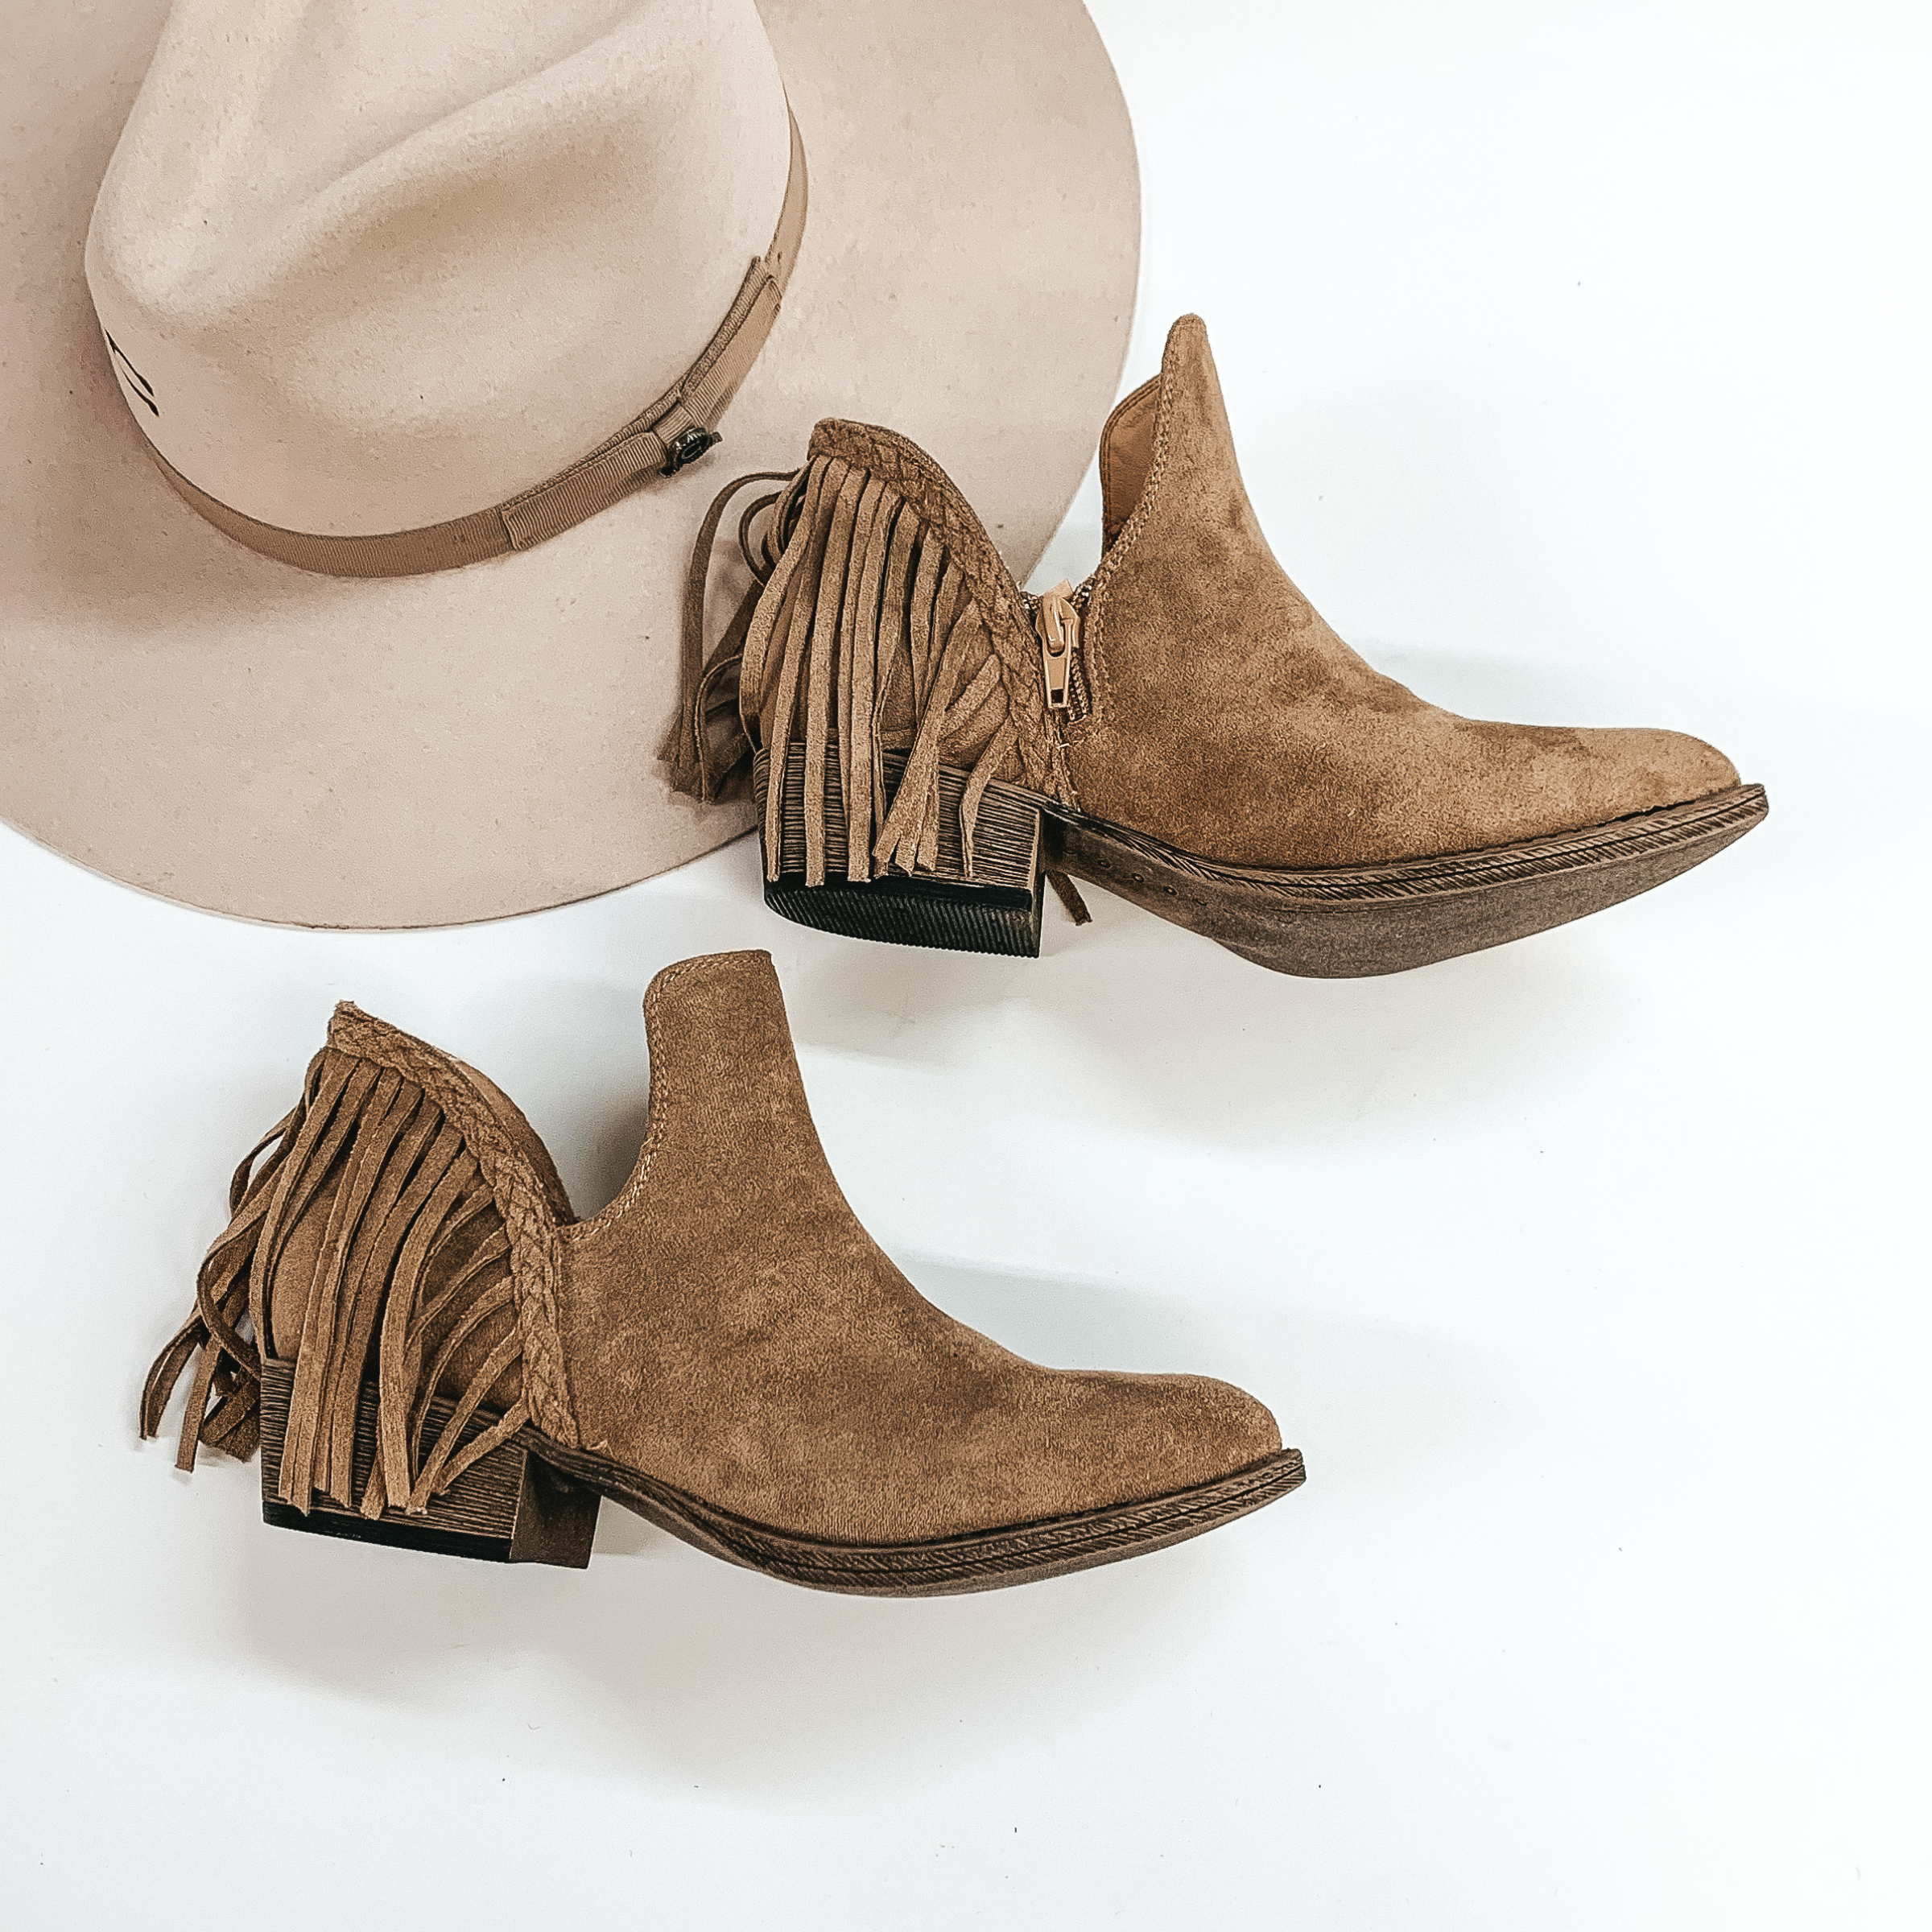 Very G | Be Yourself Heeled Fringe Booties with Cutouts in Taupe - Giddy Up Glamour Boutique